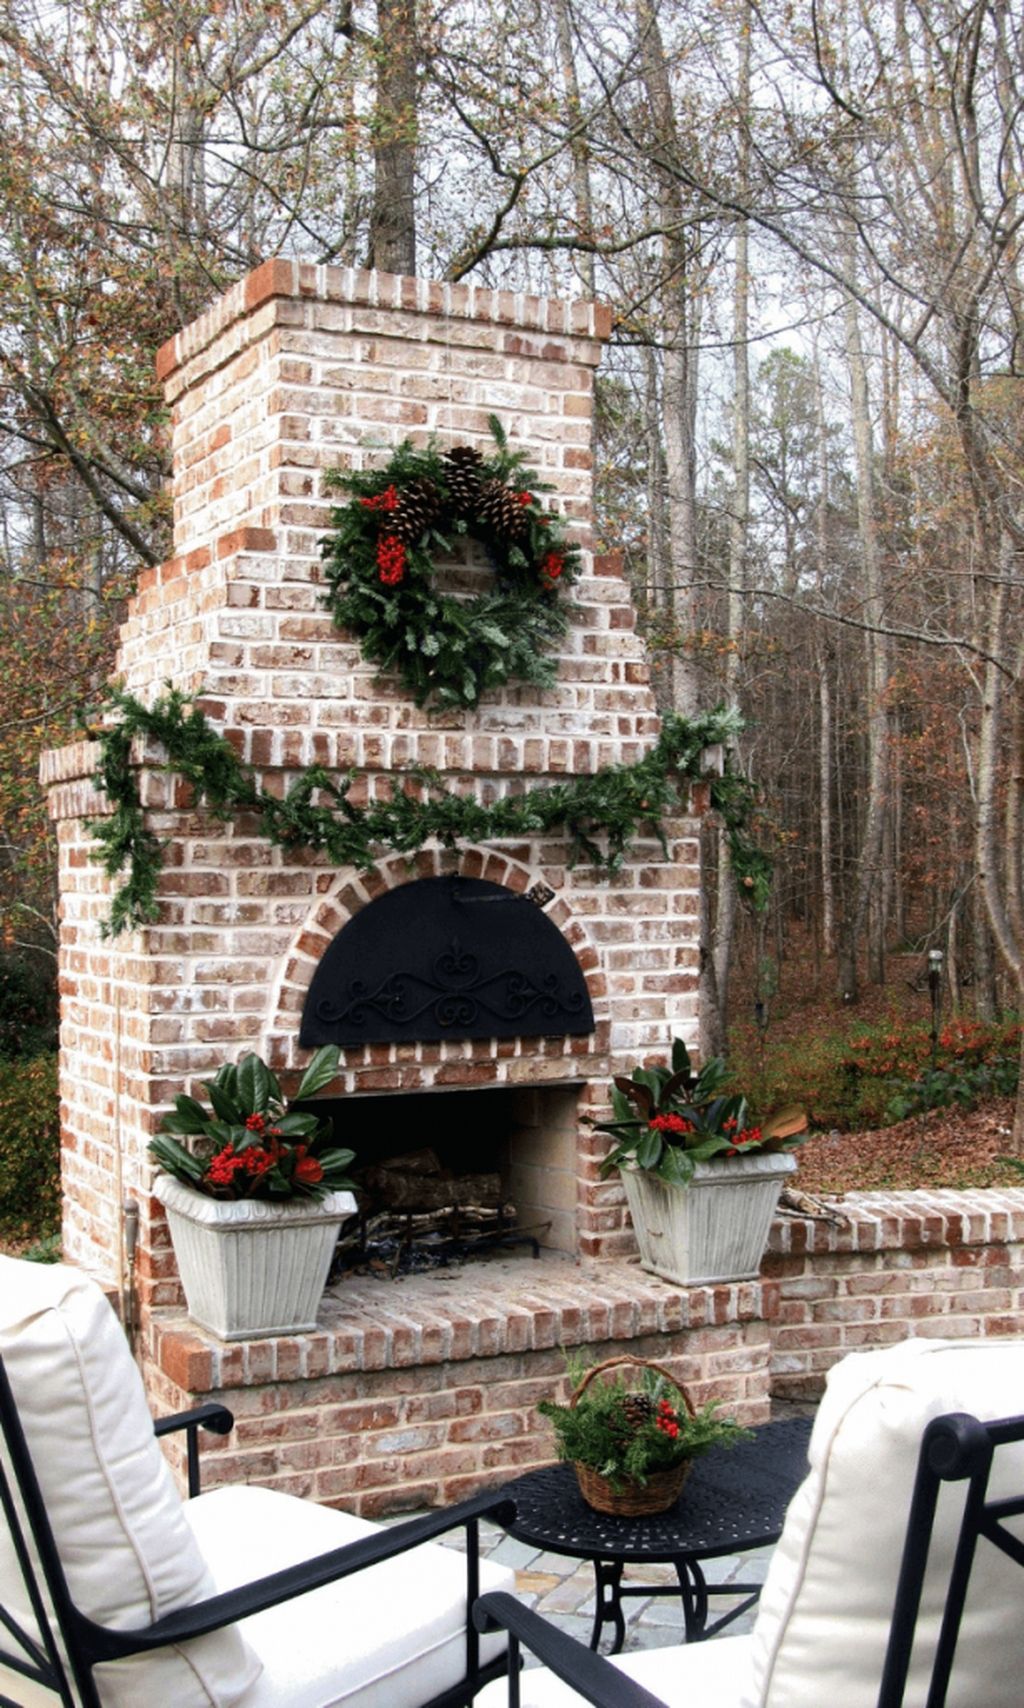 Graceful Outdoor Fireplaces Ideas For
Backyard